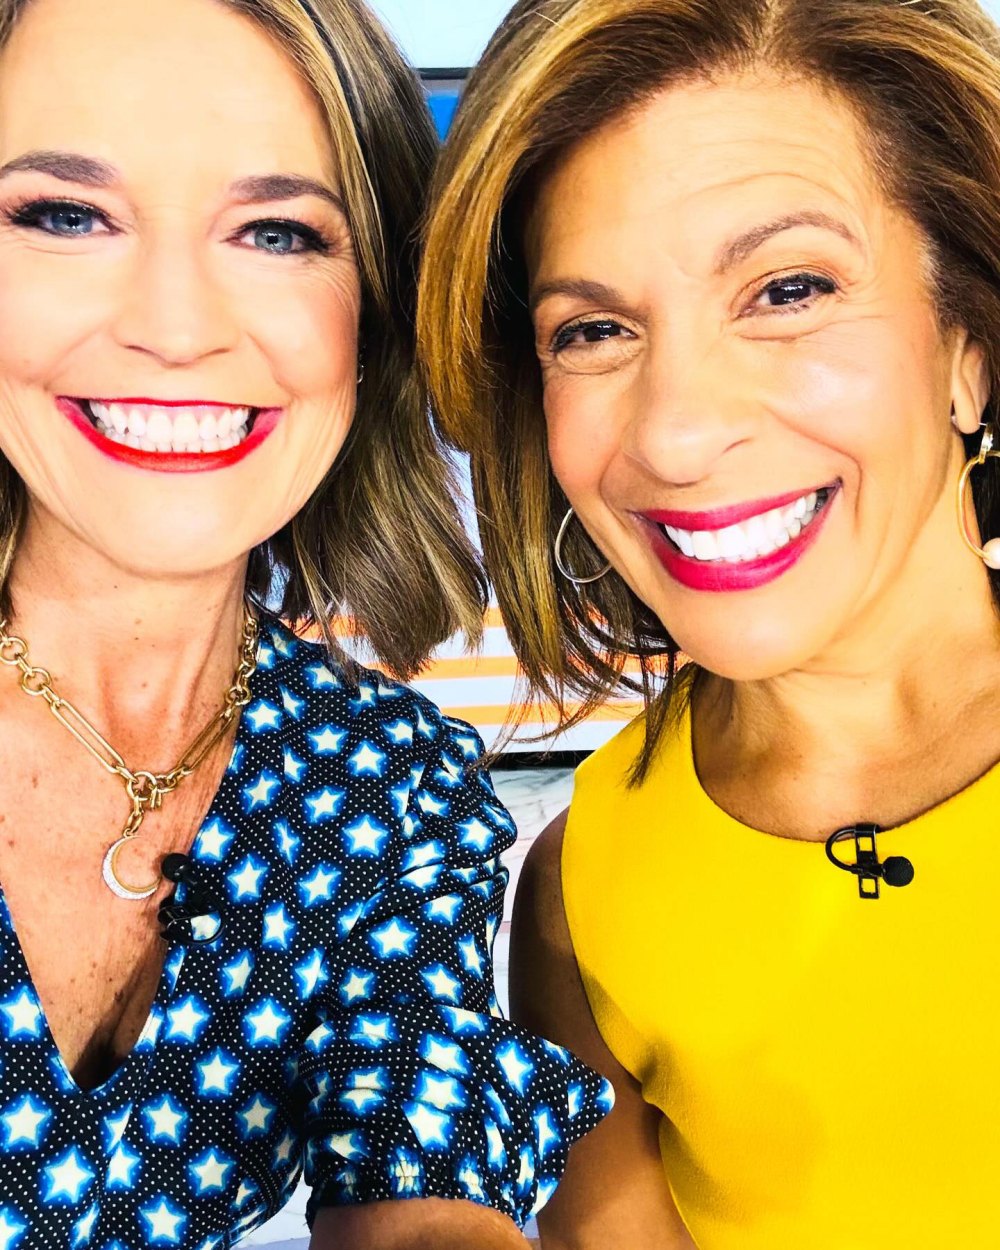 Feature Today Savannah Guthrie and Hoda Kotb Sport Eclipse-Inspired Looks